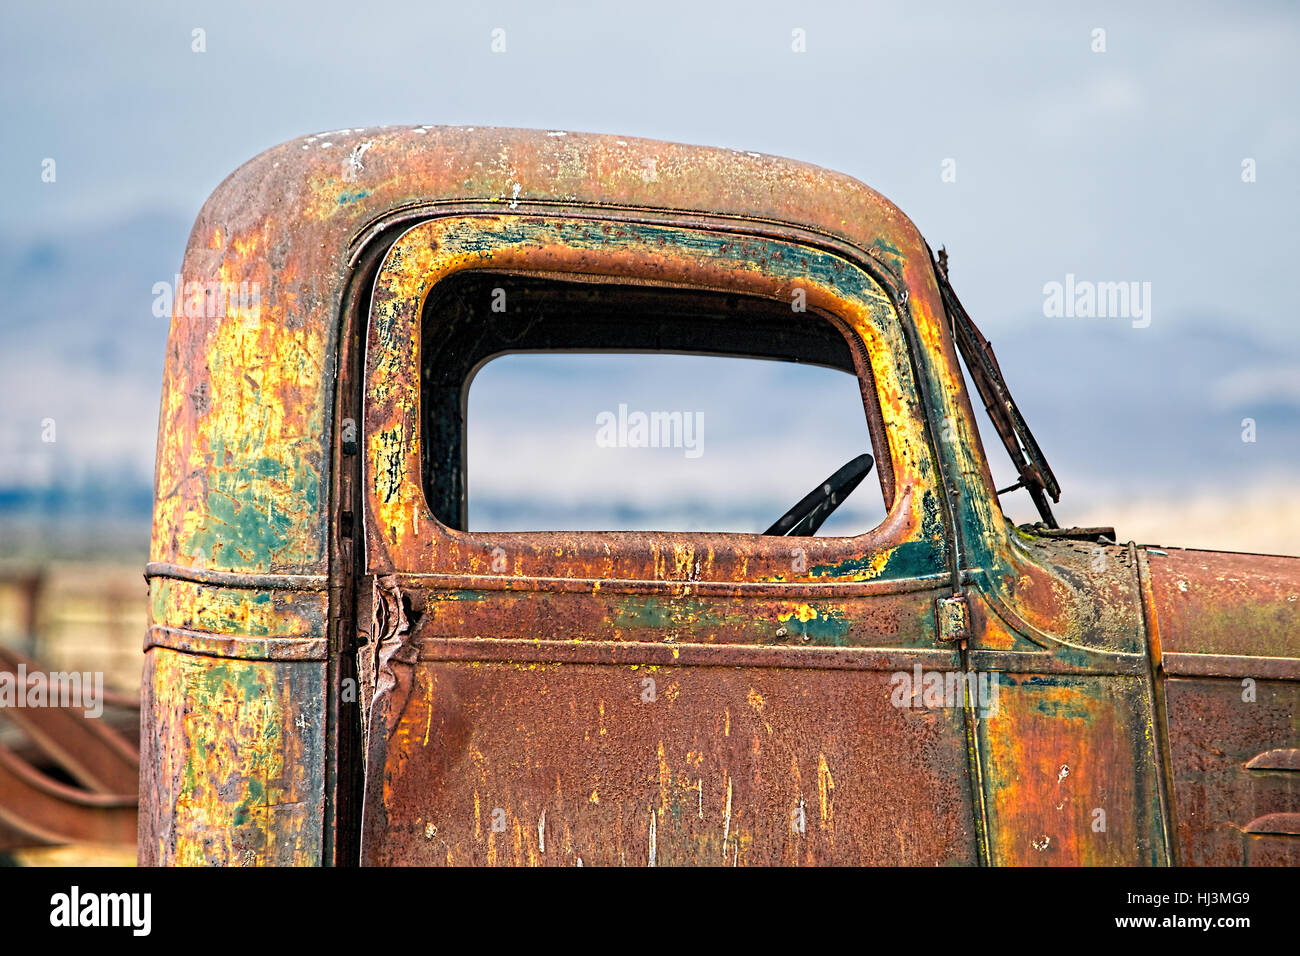 Lateral detail of the window of an old Chevrolet Truck abandoned in a pasture field in California.  This old 1940s era Chevrolet truck has been rustin Stock Photo